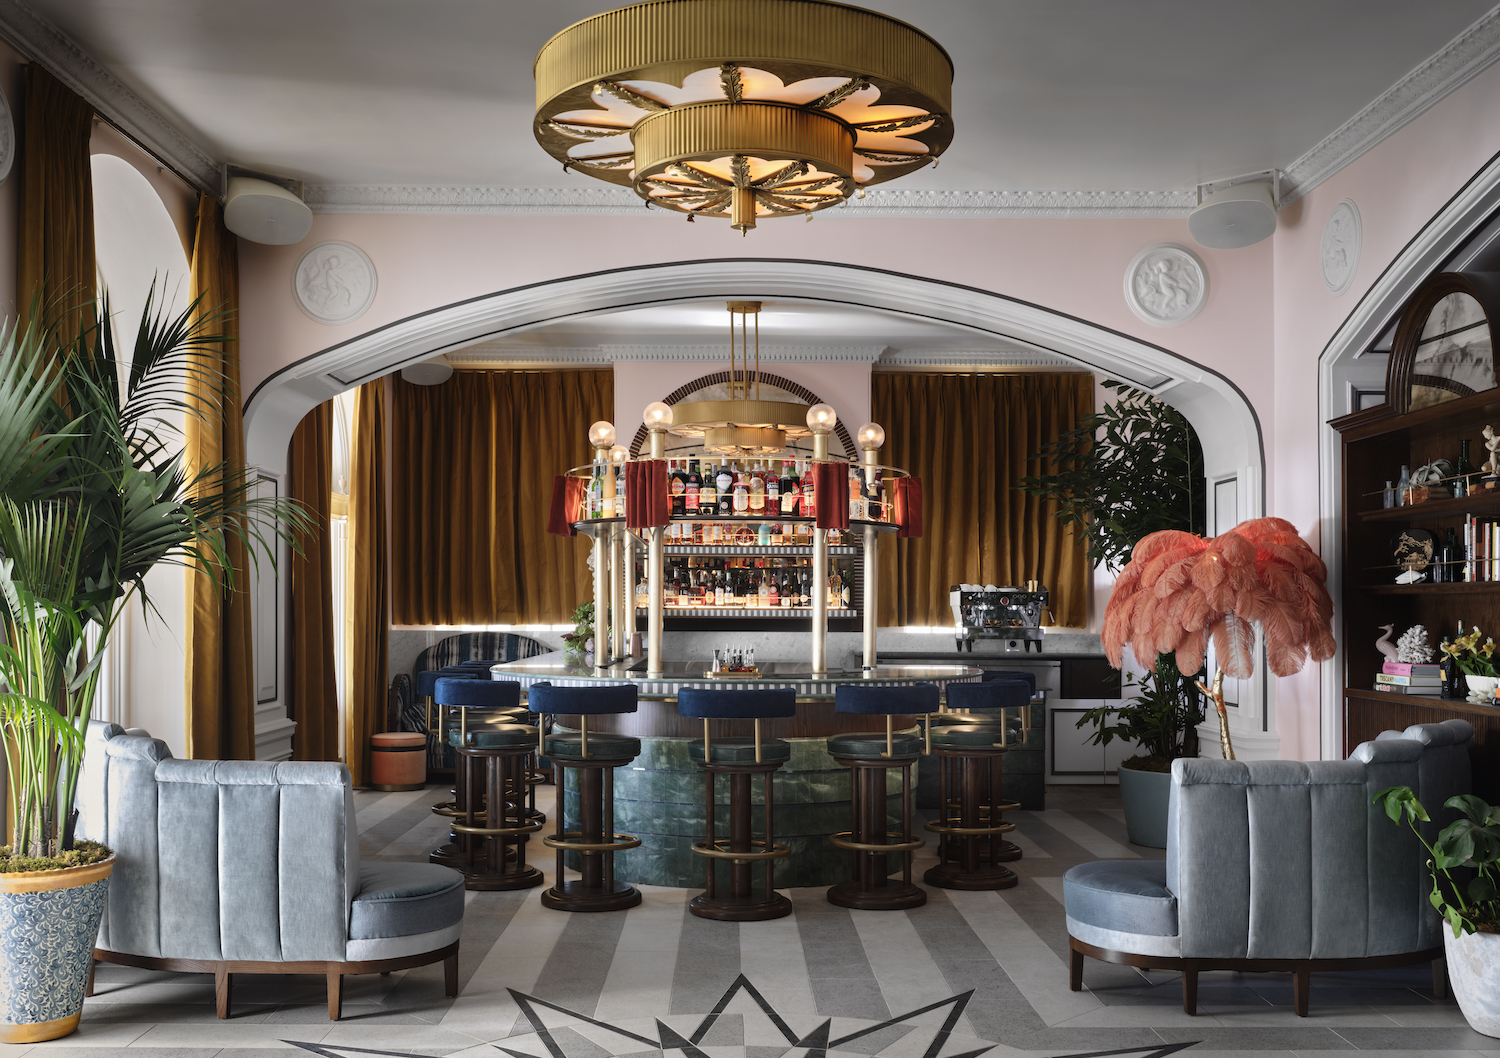 Horseshoe-shaped bar with chandelier and pink accents